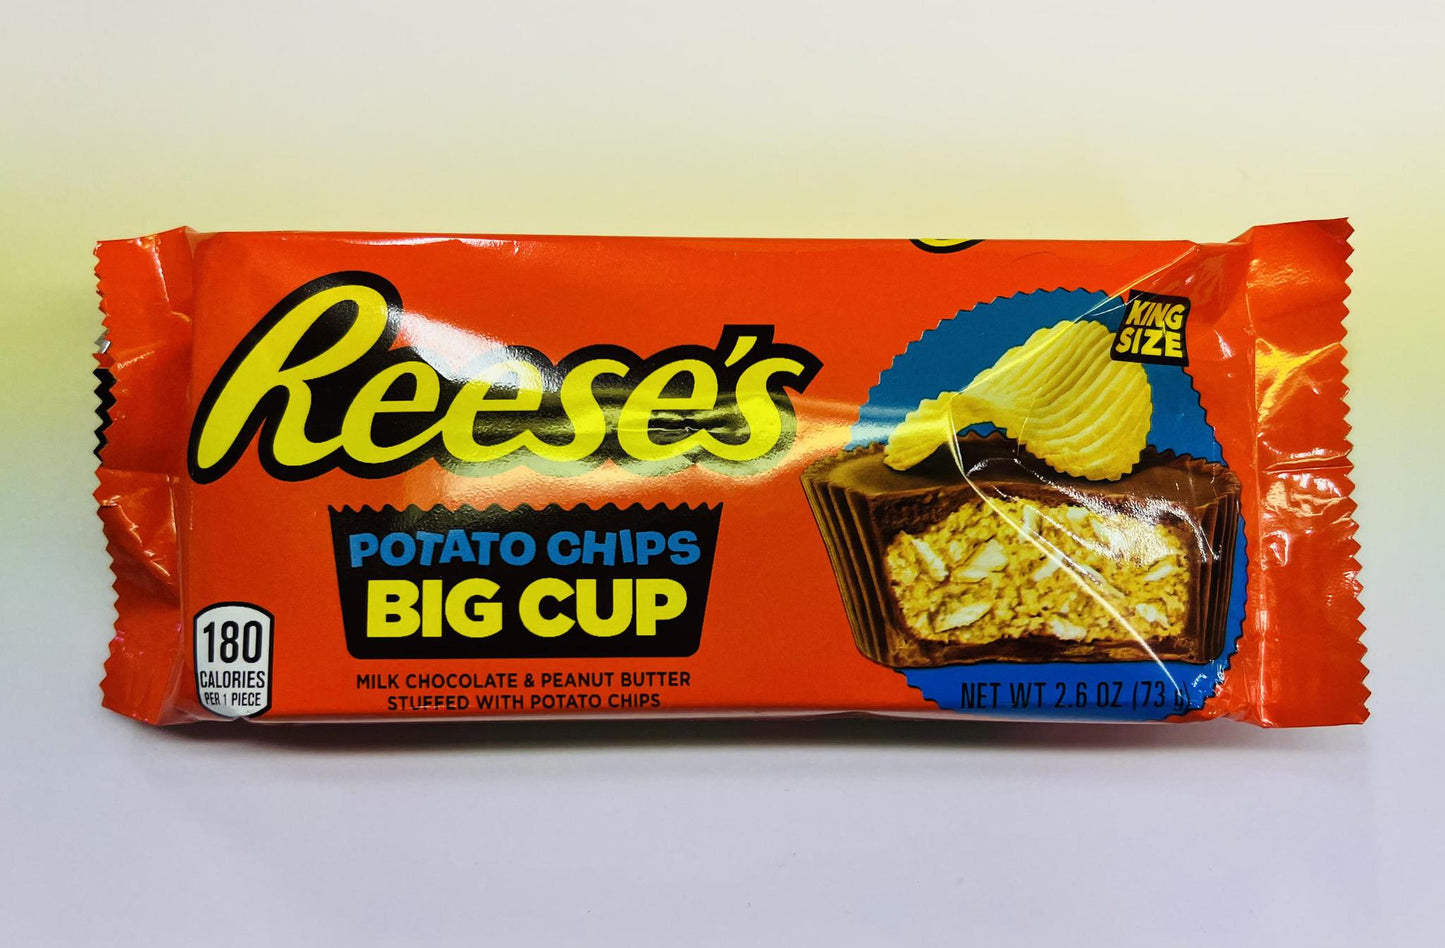 Reese's Big Cup with Potato Chips King Size